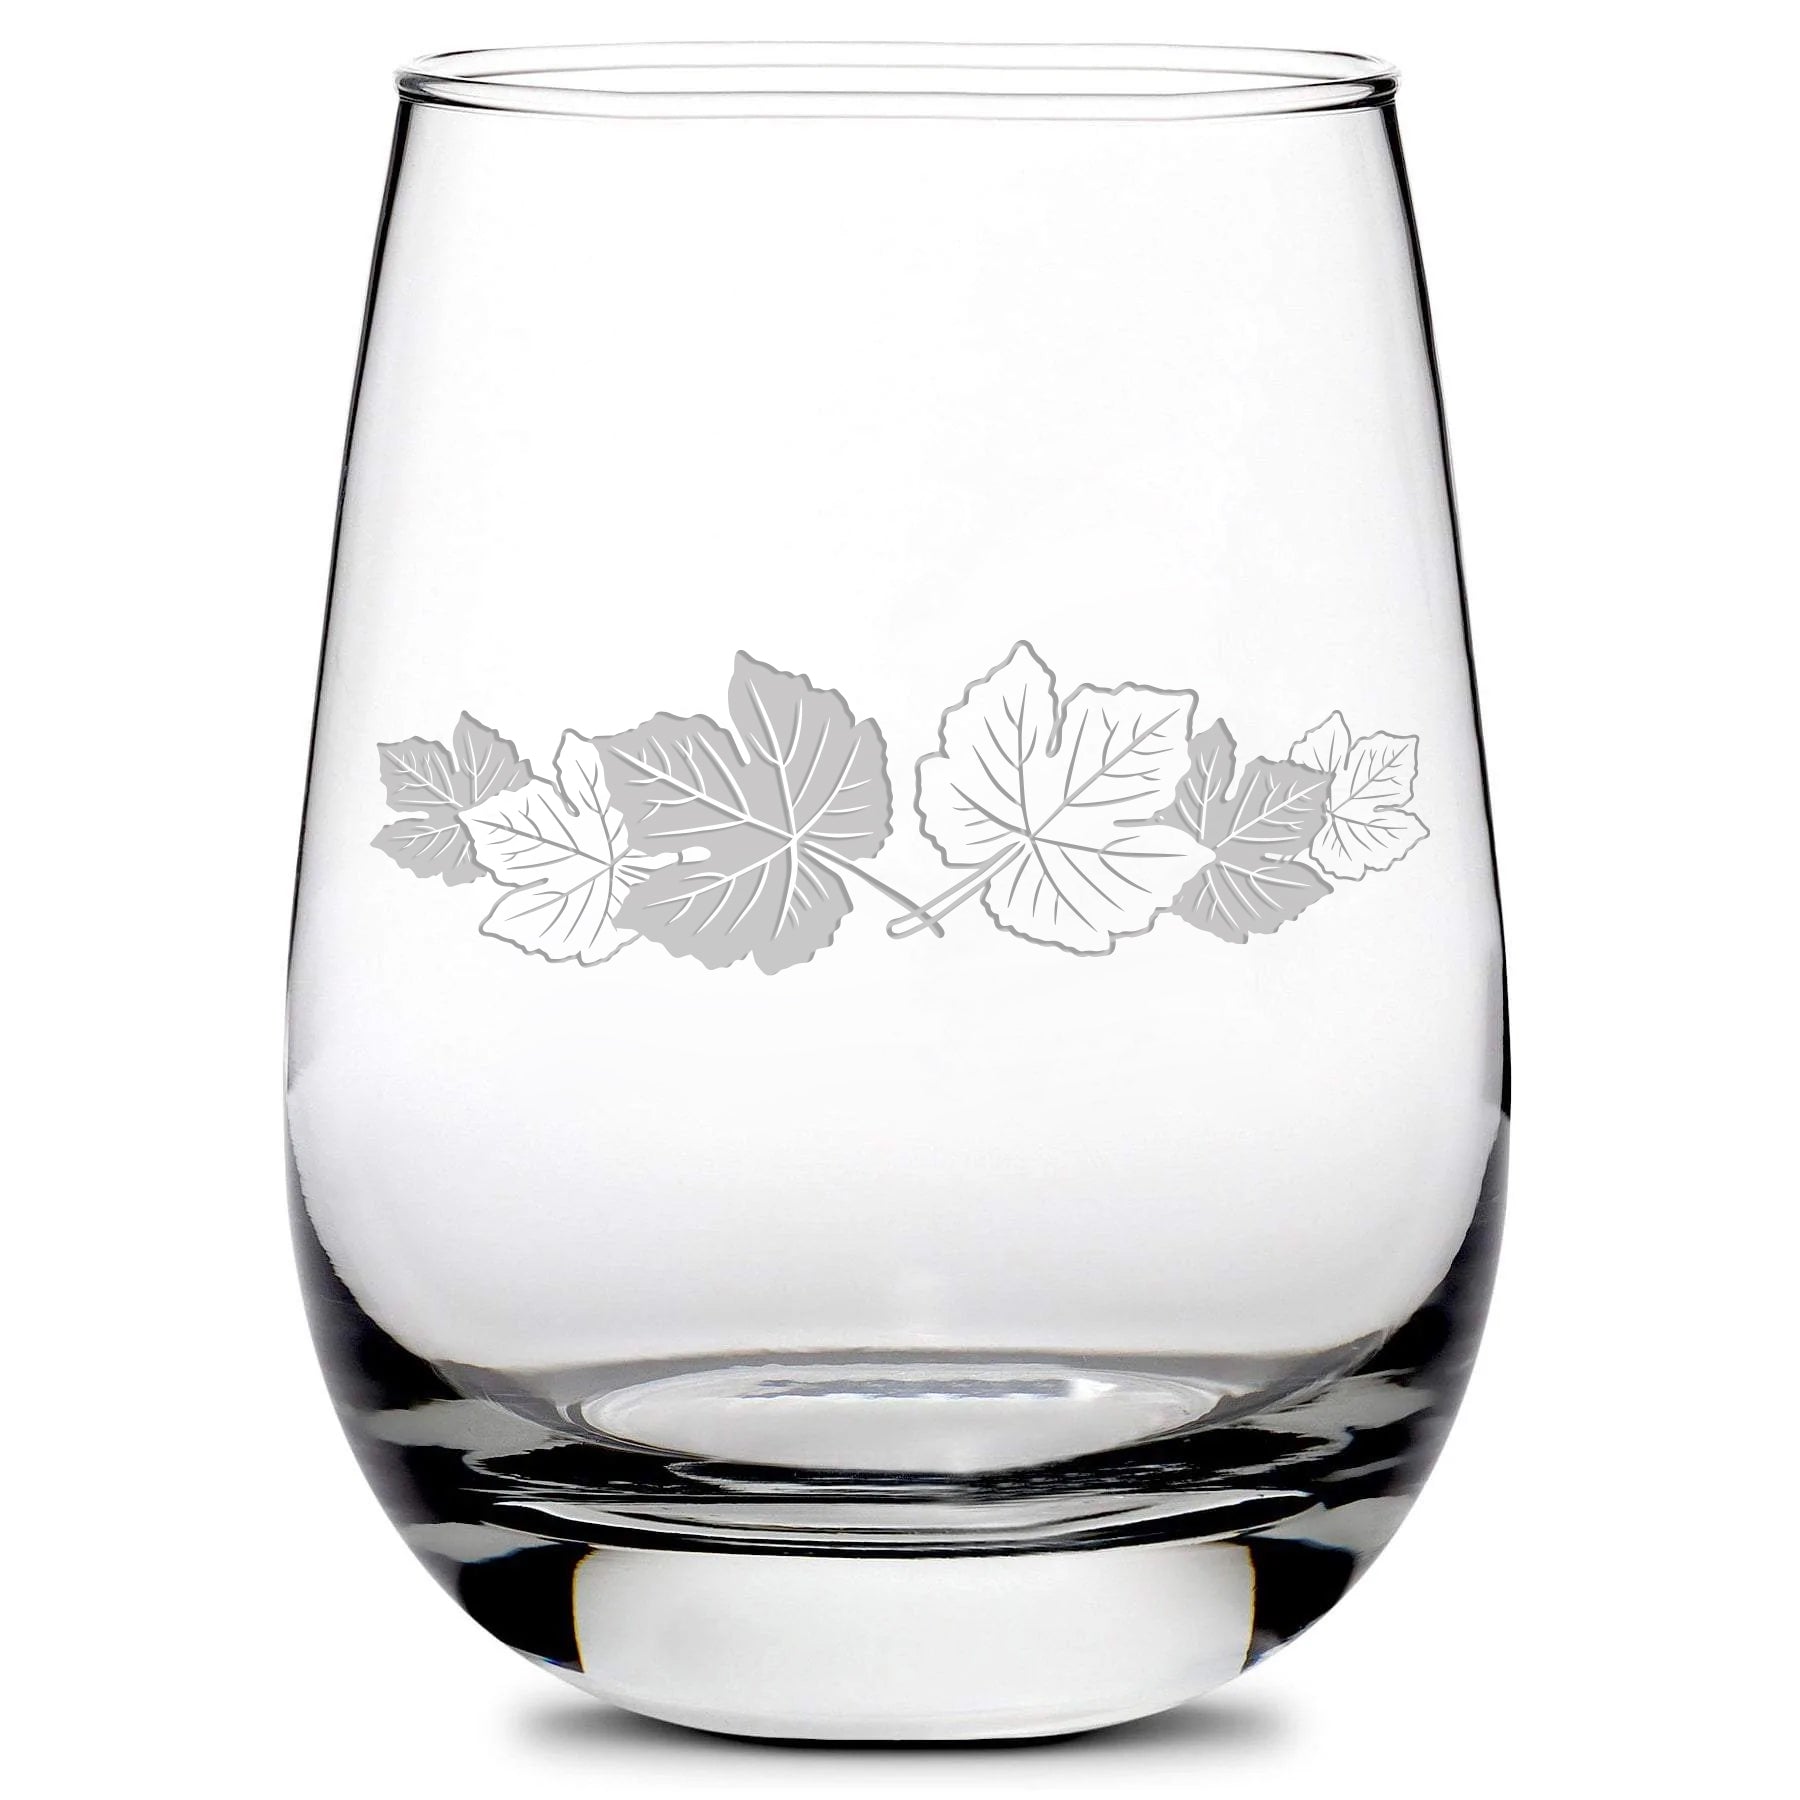 Premium Stemless Wine Glass, Group of Grape Leaves, Laser Etched or Hand Etched, Made in USA, 16oz